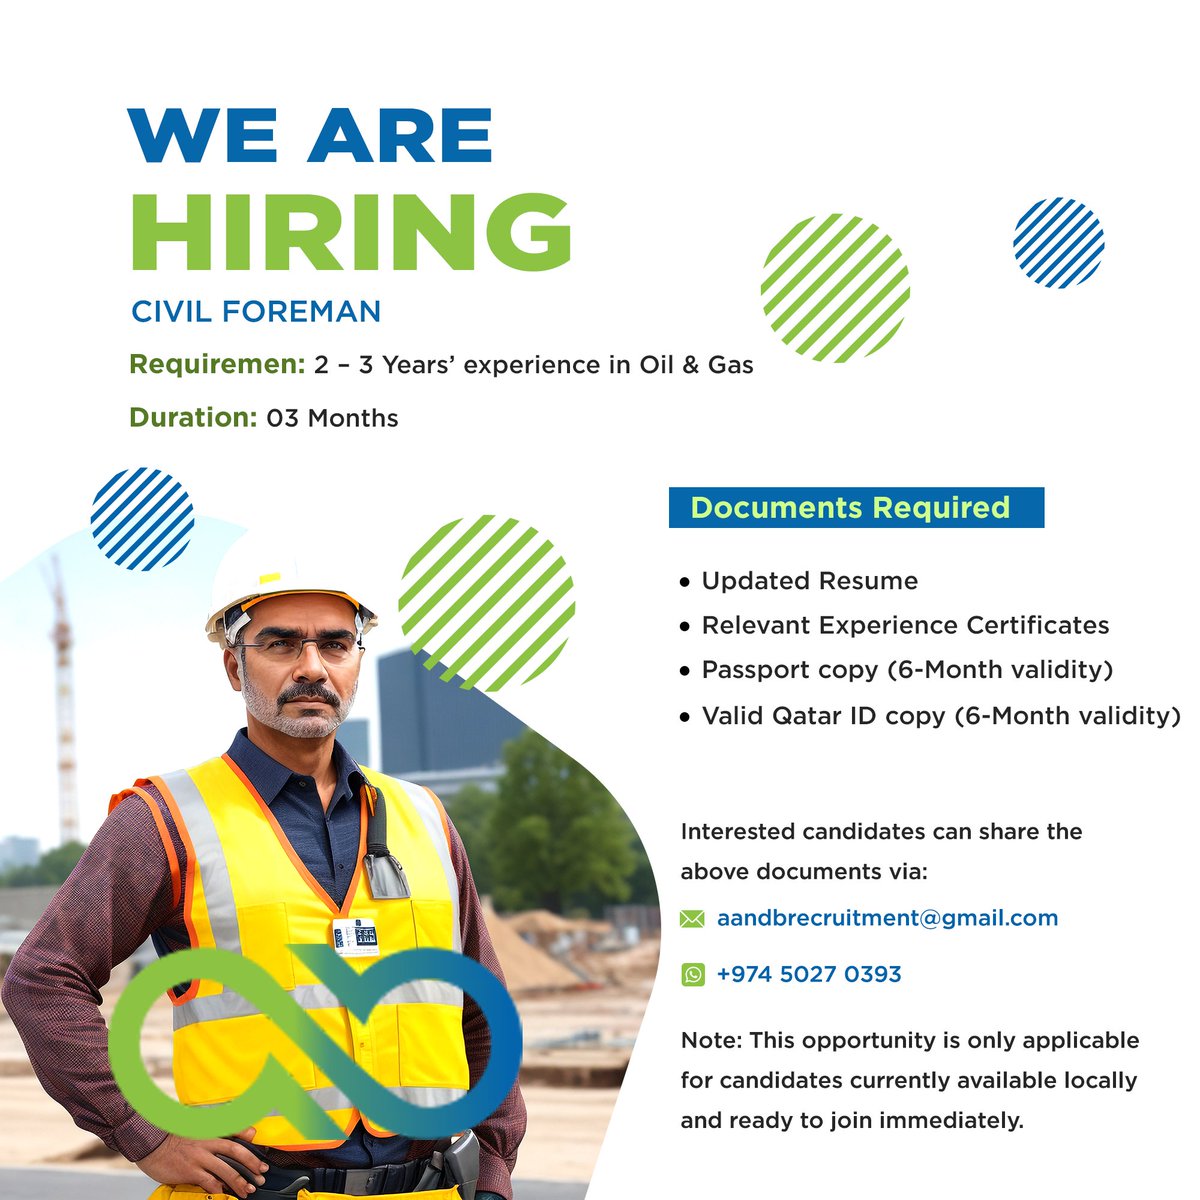 Open position for Civil Foreman role in Qatar. 
To apply, send your resume to aandbrecruitment@gmail.com or contact +974 - 50270393
.
.
.
#AandBprojects #Qatar #oilandgas #Doha #jobseekers